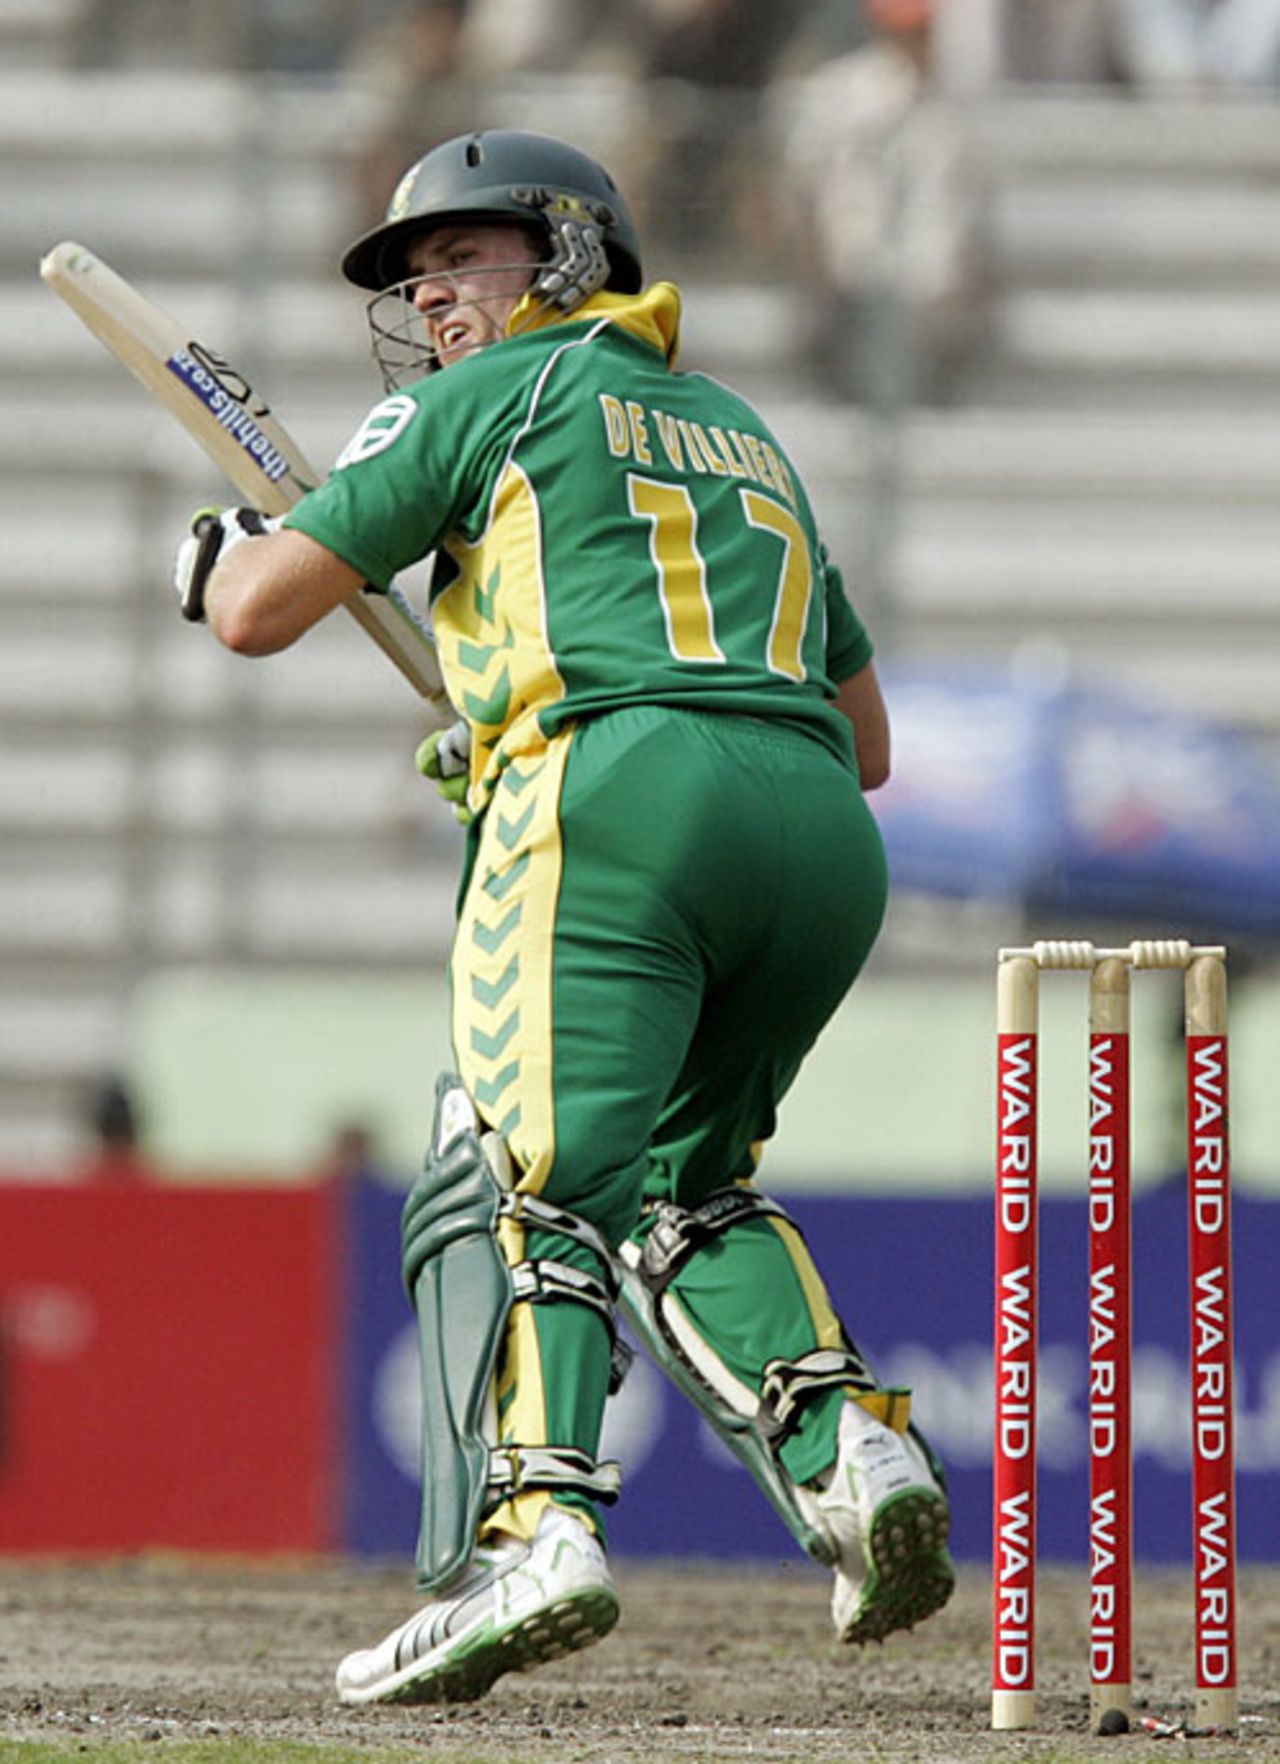 AB de Villiers flicks behind the wicket, Bangladesh v South Africa, 2nd ODI, Mirpur, March 12, 2008